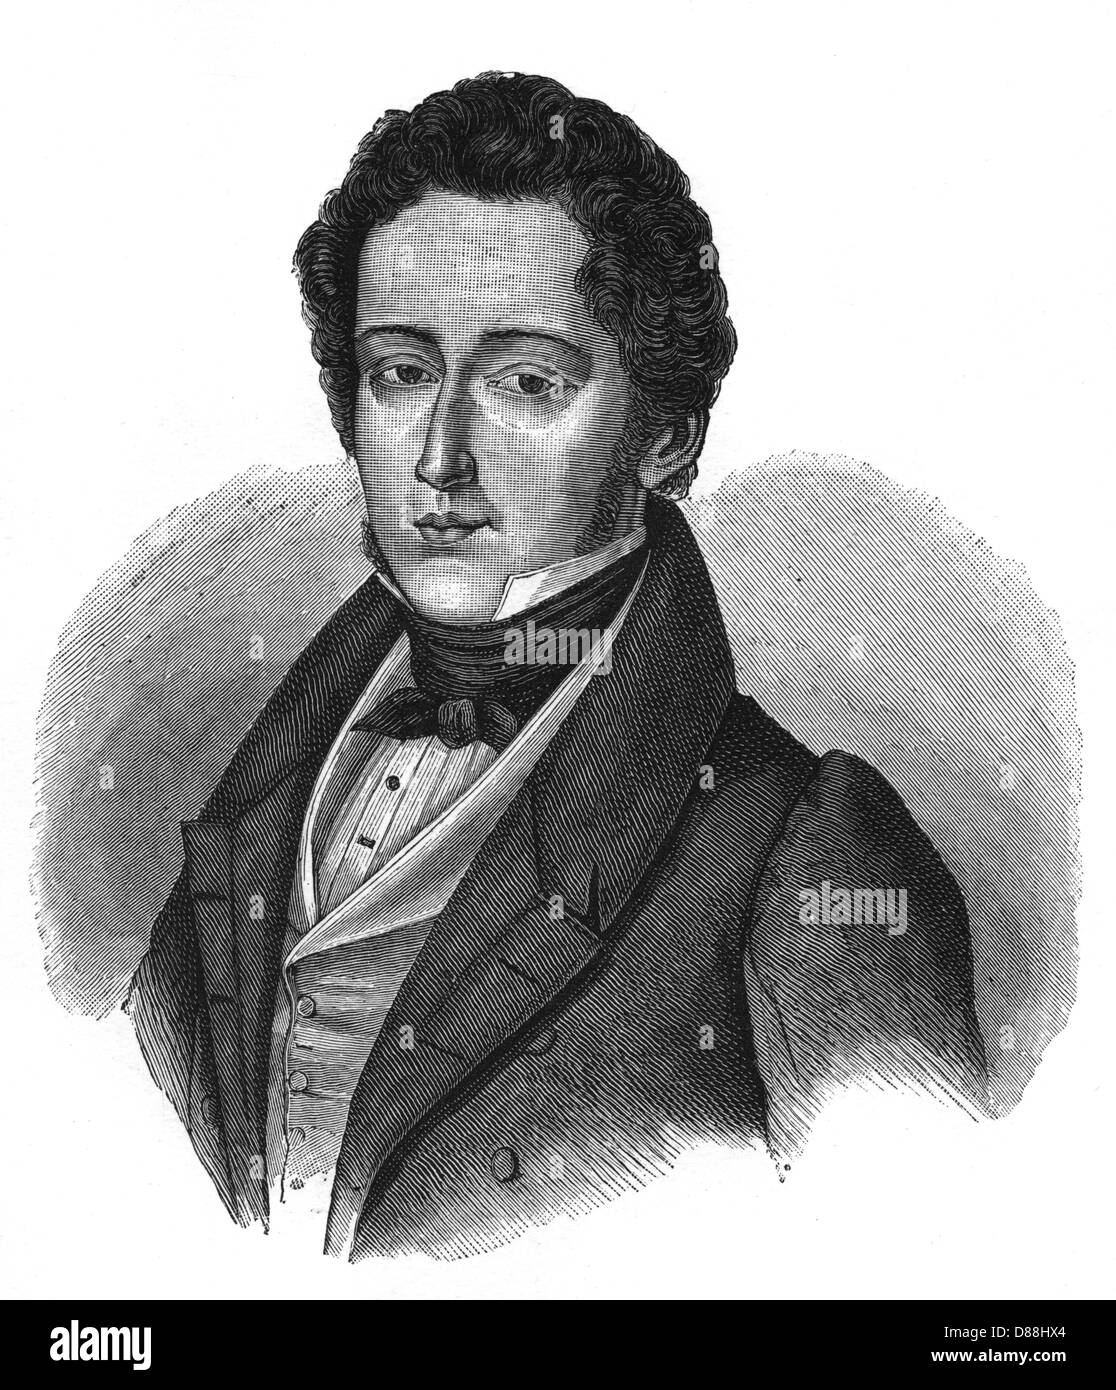 Frédéric Chopin Frenchpolish Composer Wood Engraving Published In 1893  Stock Illustration - Download Image Now - iStock